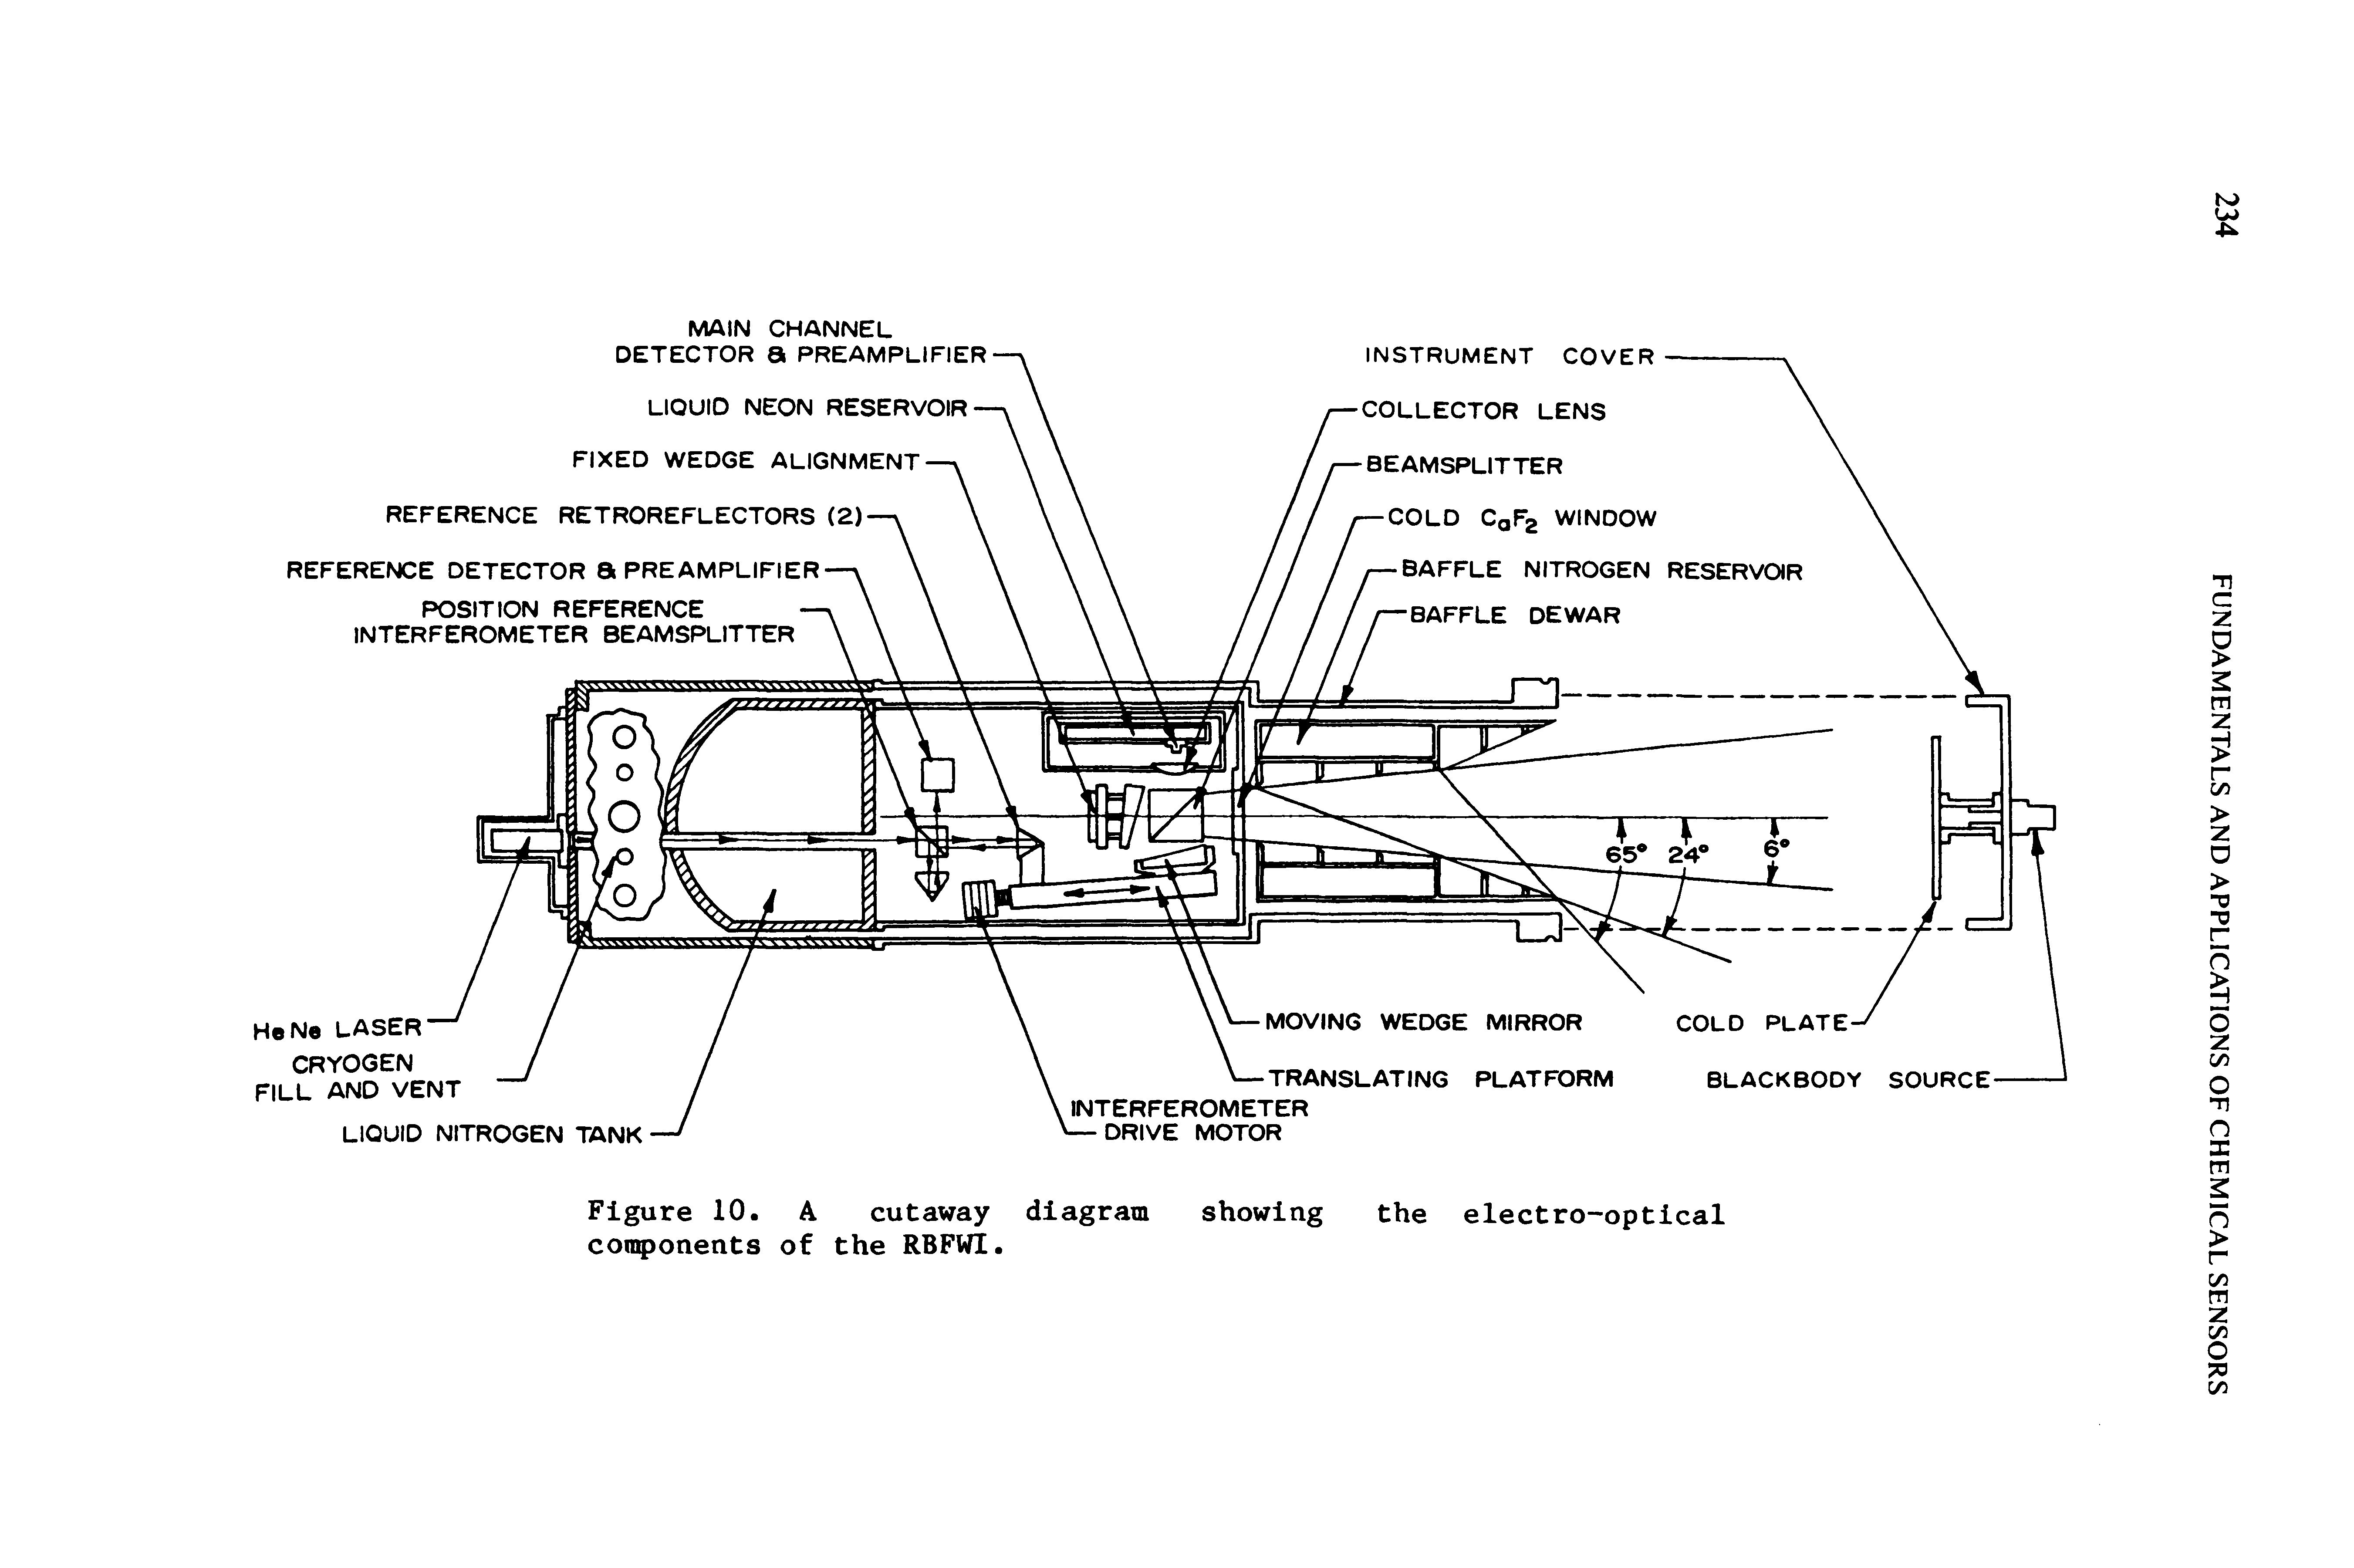 Figure 10. A cutaway diagram showing the electro-optical components of the RBFWI.